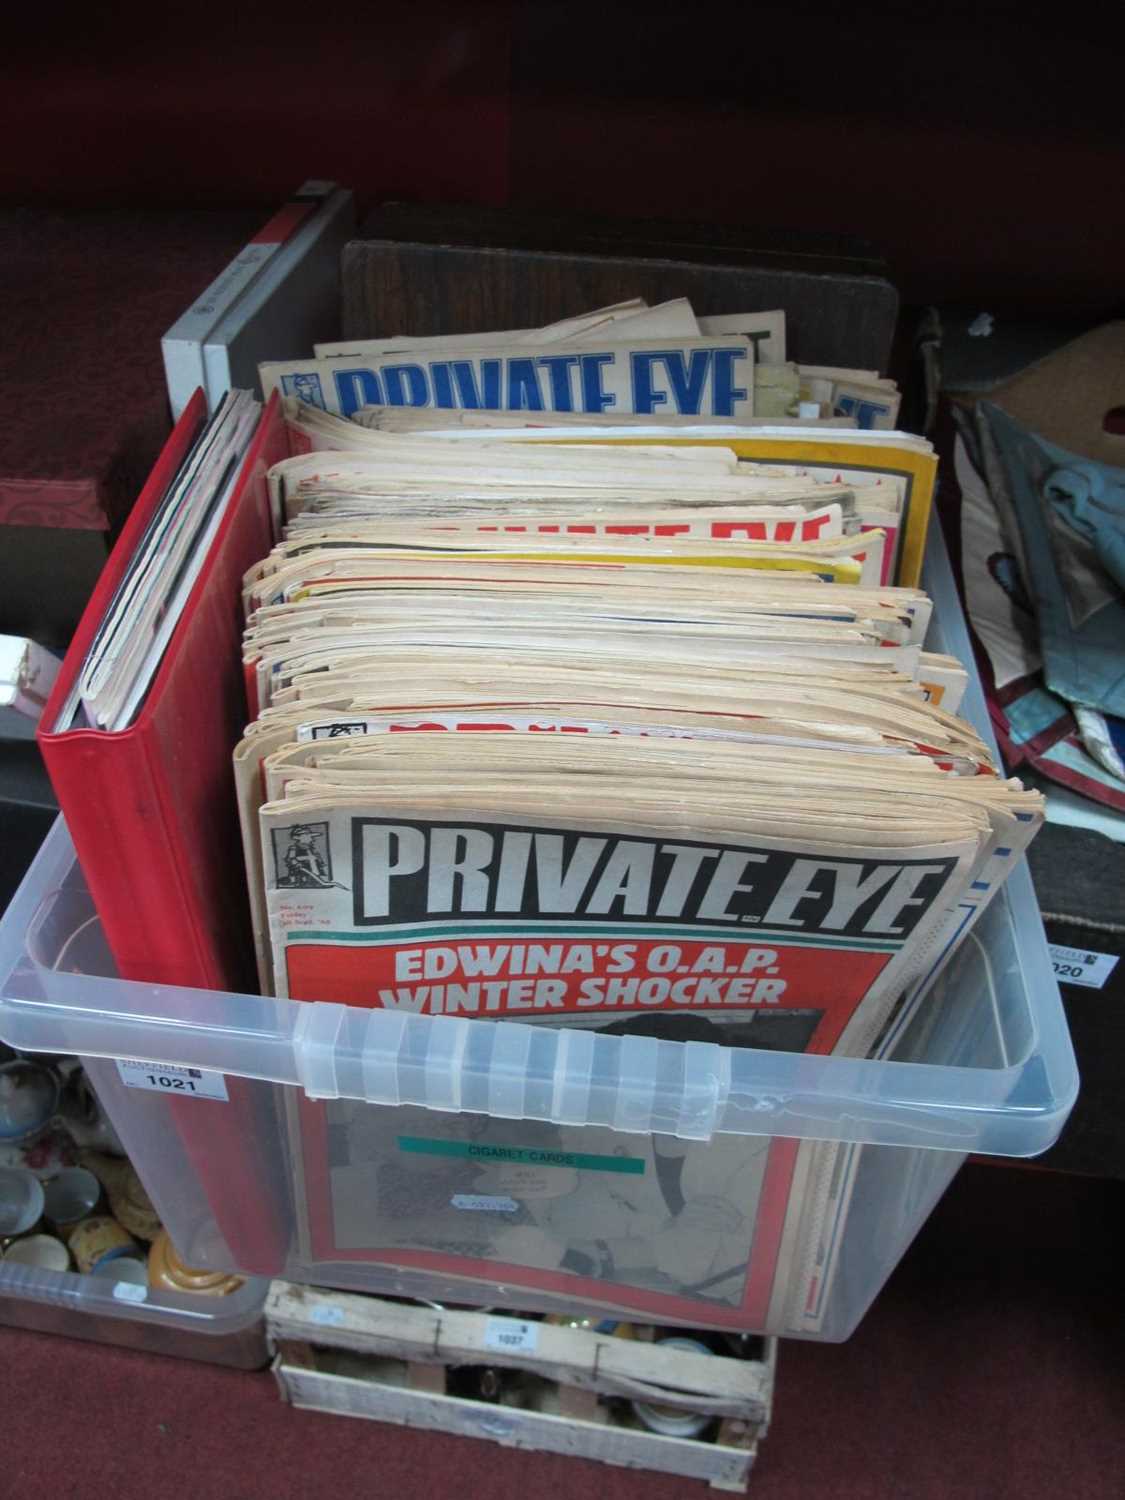 Private Eye Magazines 1982 and Later, approximately 140. F.A Cup Final programmes 1987, 88, 90